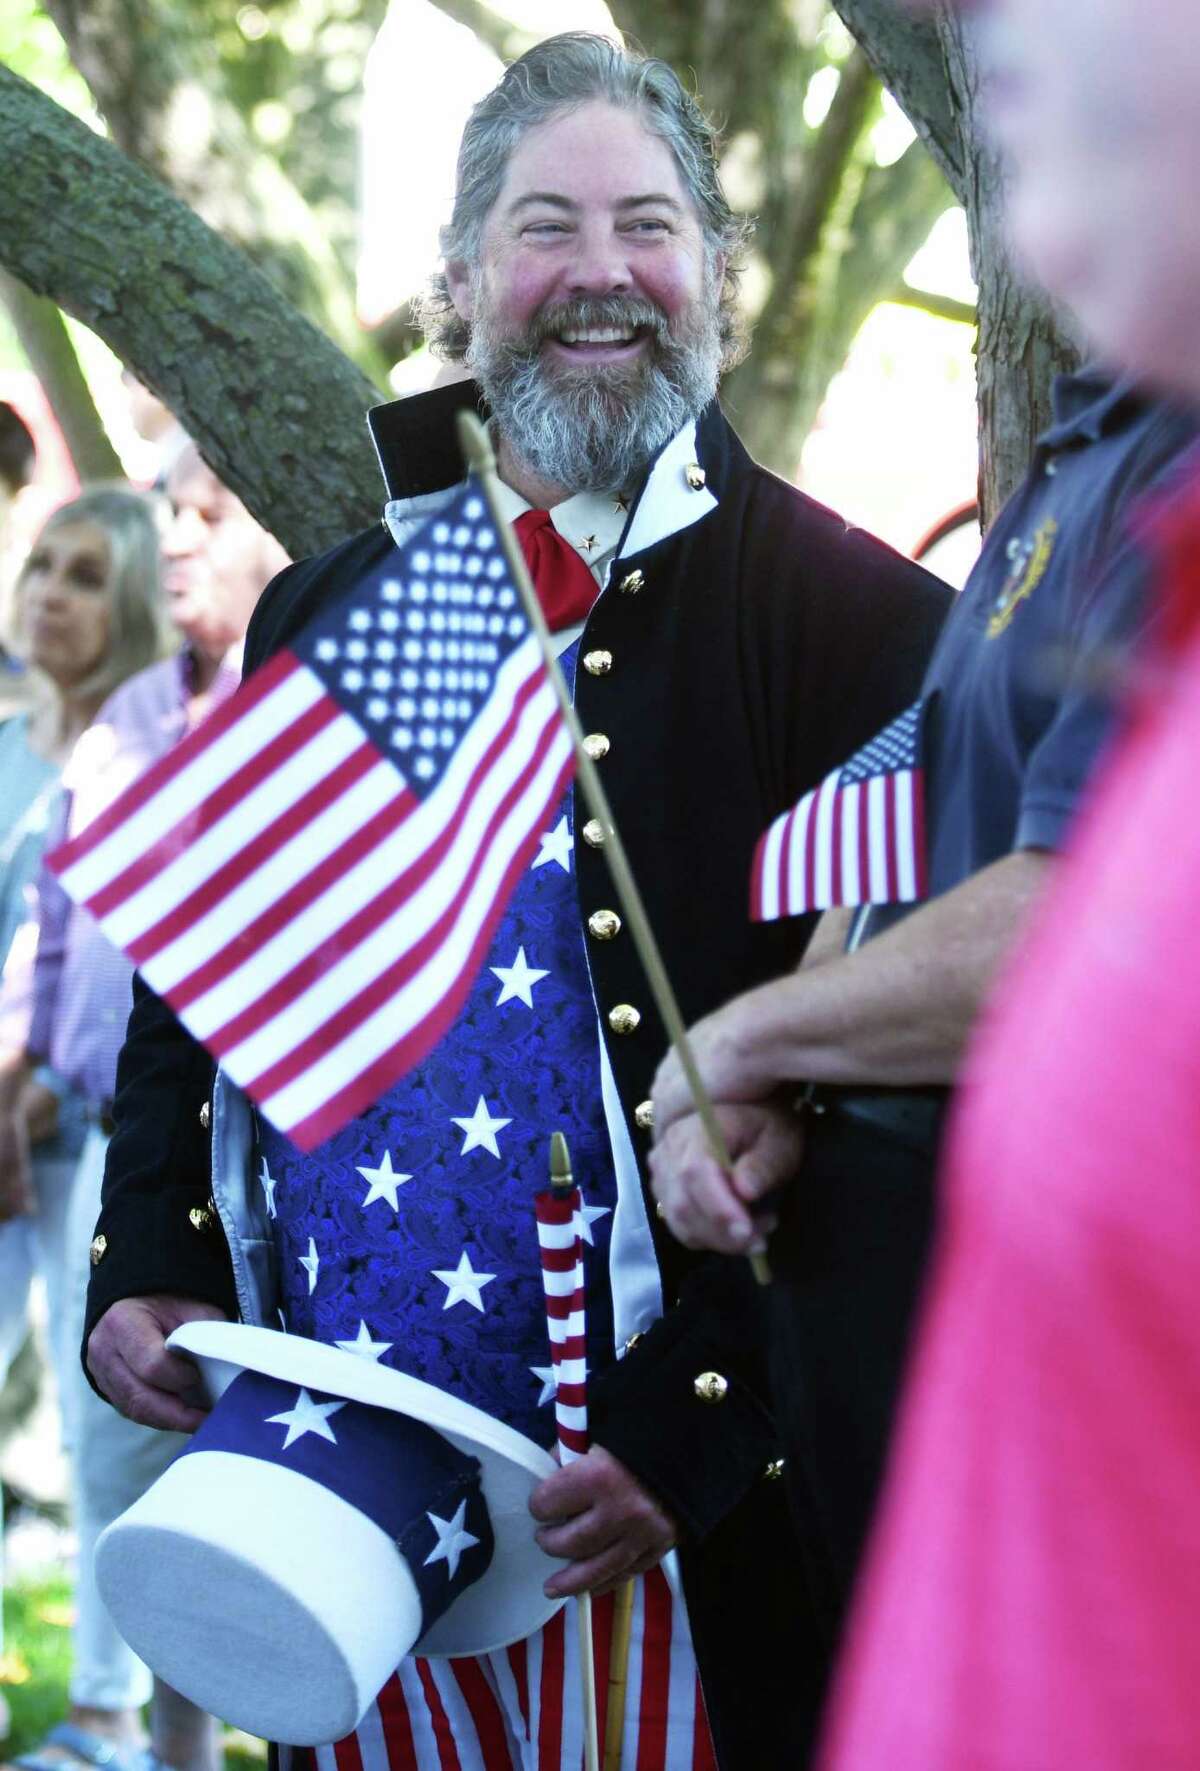 John Ferris Robben, of Riverside, dresses as Uncle Same at the Fourth of July Celebration at Greenwich Town Hall in Greenwich, Conn. Monday, July 4, 2022. Presented by the Independence Day Association of Greenwich, the ceremony featured various readings and songs, a raising of the Colonial flag, recognition of the original Greenwich settlers, and reading of the names of Greenwich soldiers killed in the Revolutionary War.